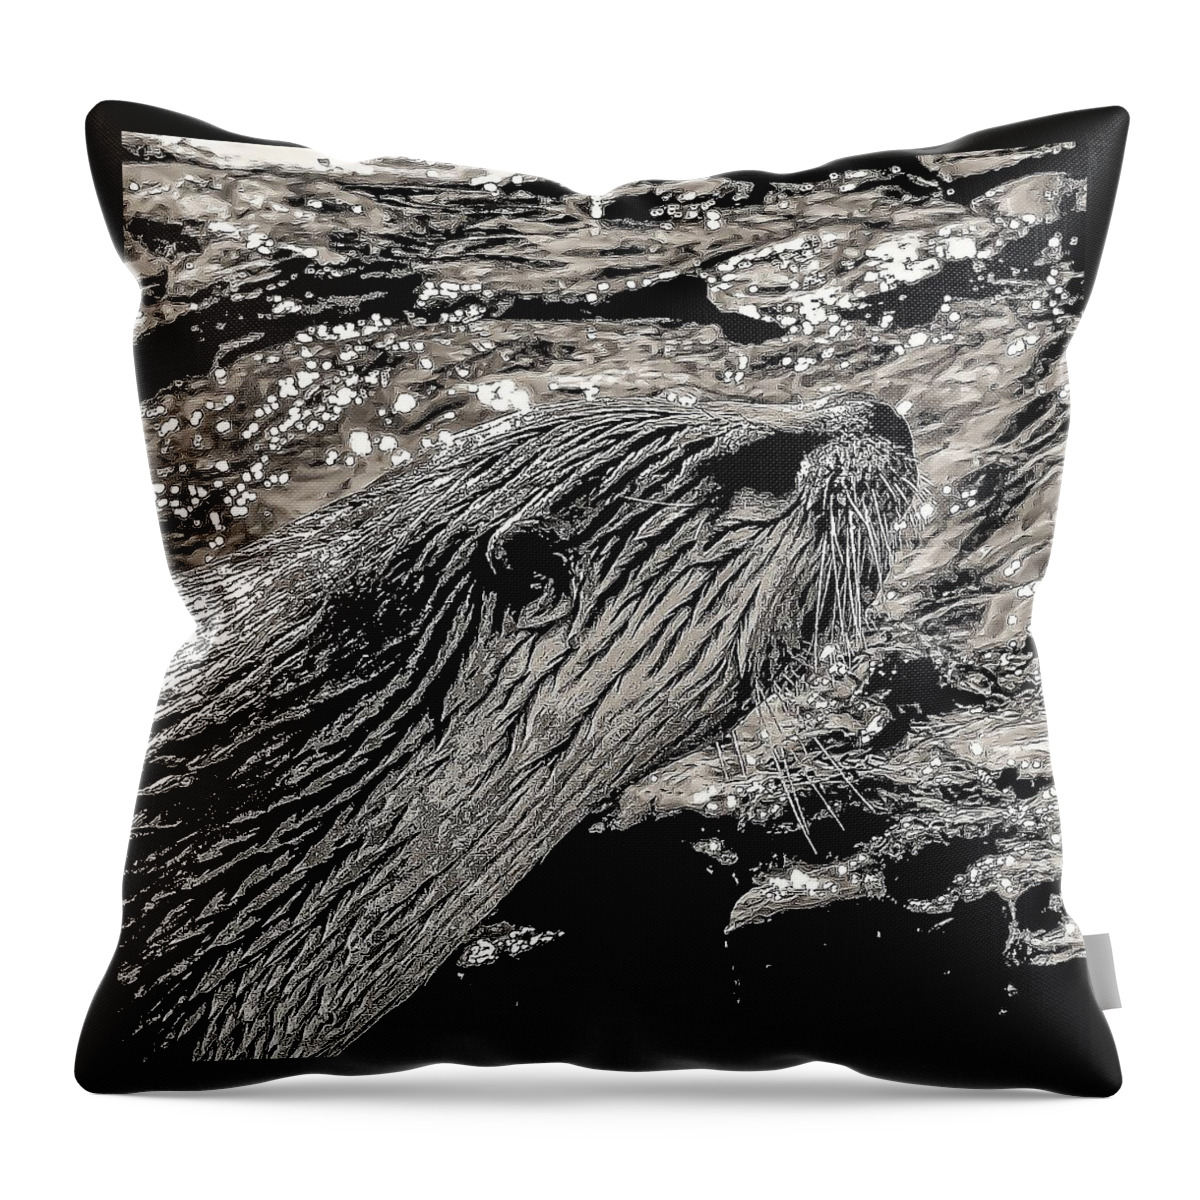 Otter Water River Pond Black White Throw Pillow featuring the photograph Otter2 by John Linnemeyer